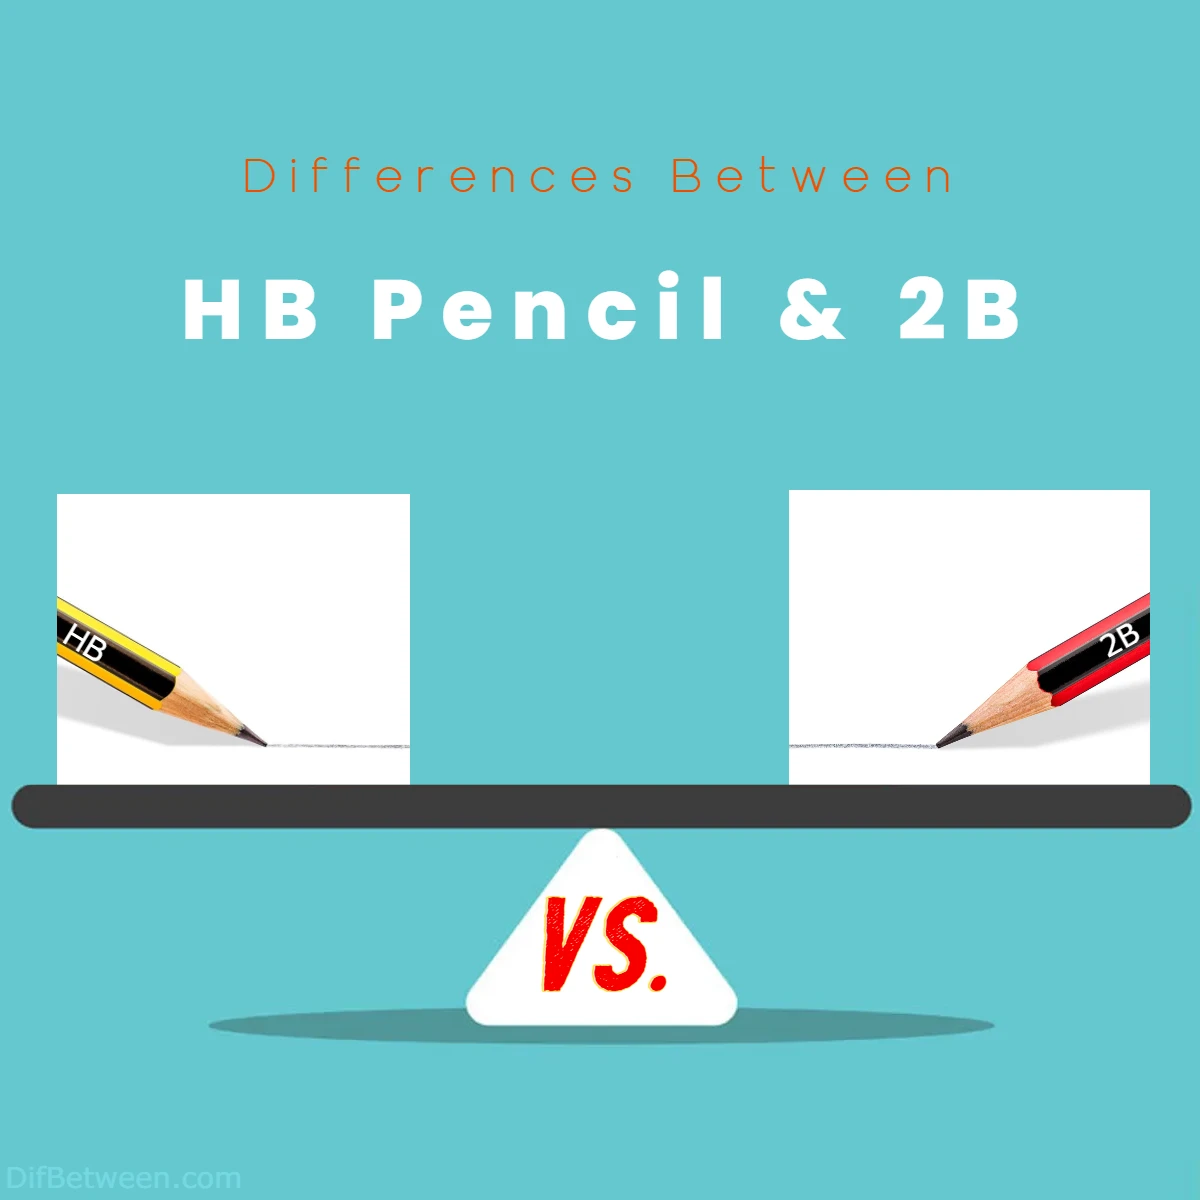 Differences Between HB Pencil and 2B